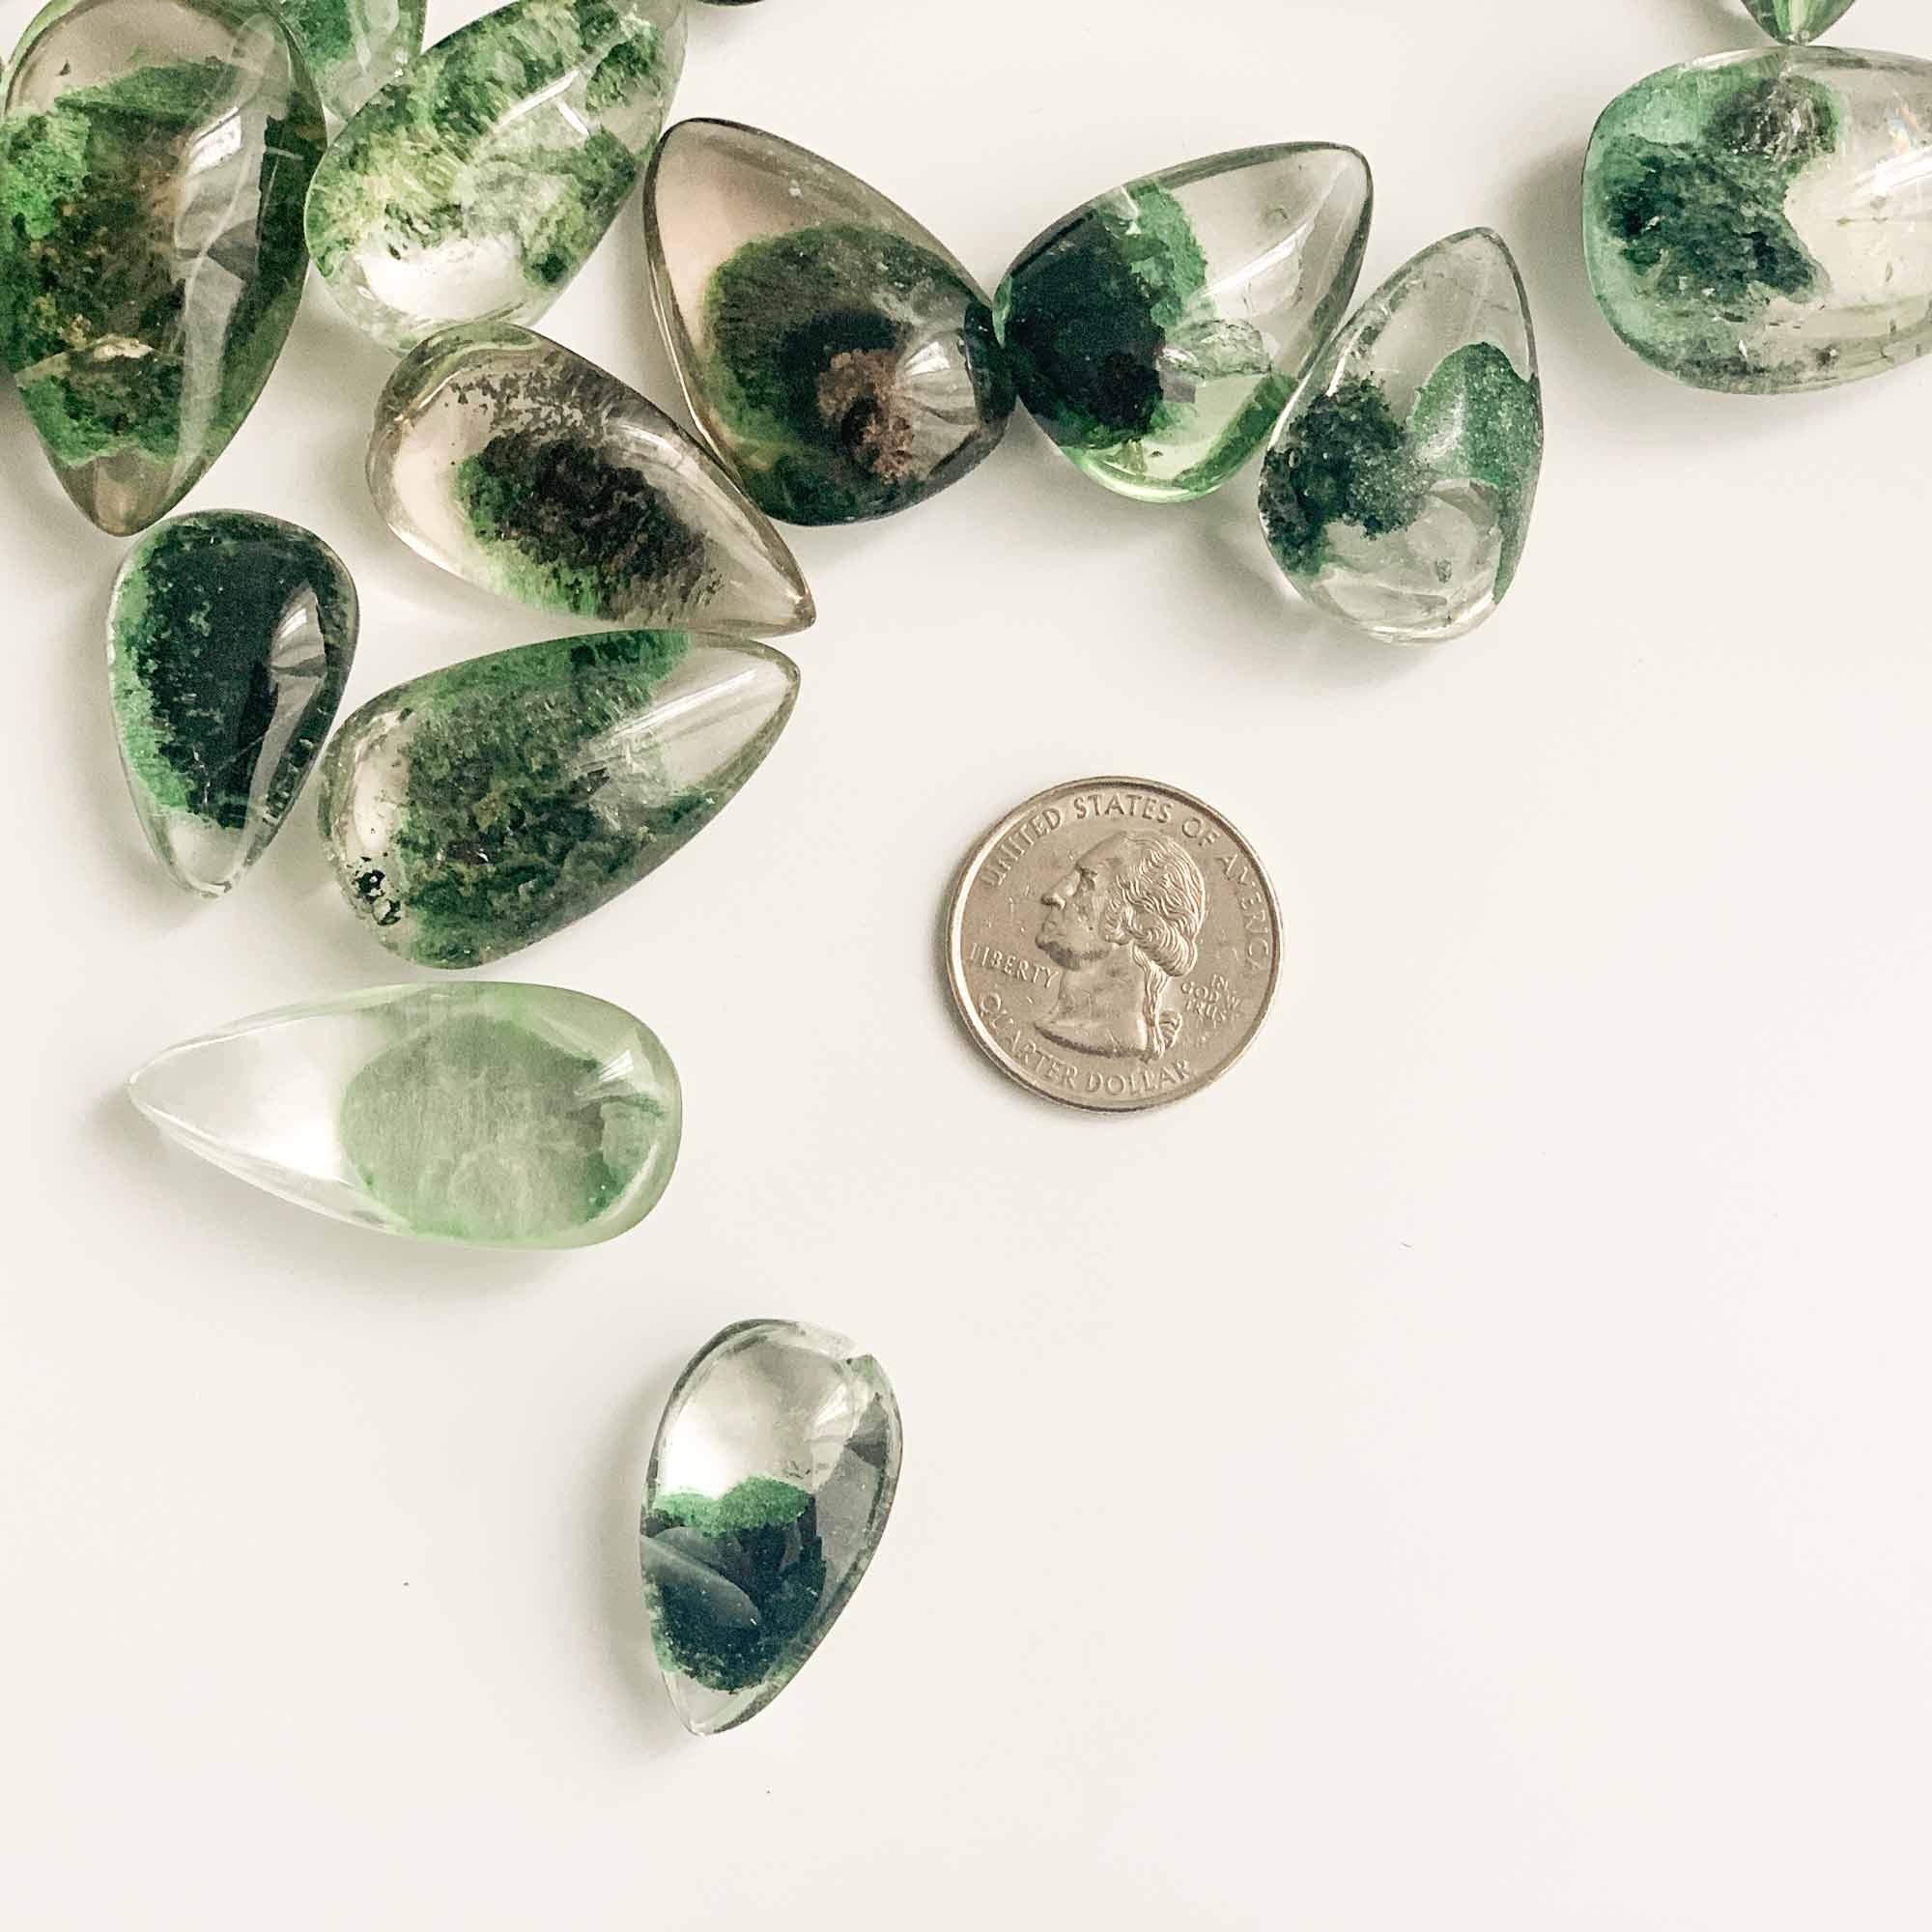 quarter dollar coin and several pieces of green ghost crystals with different size and pattern